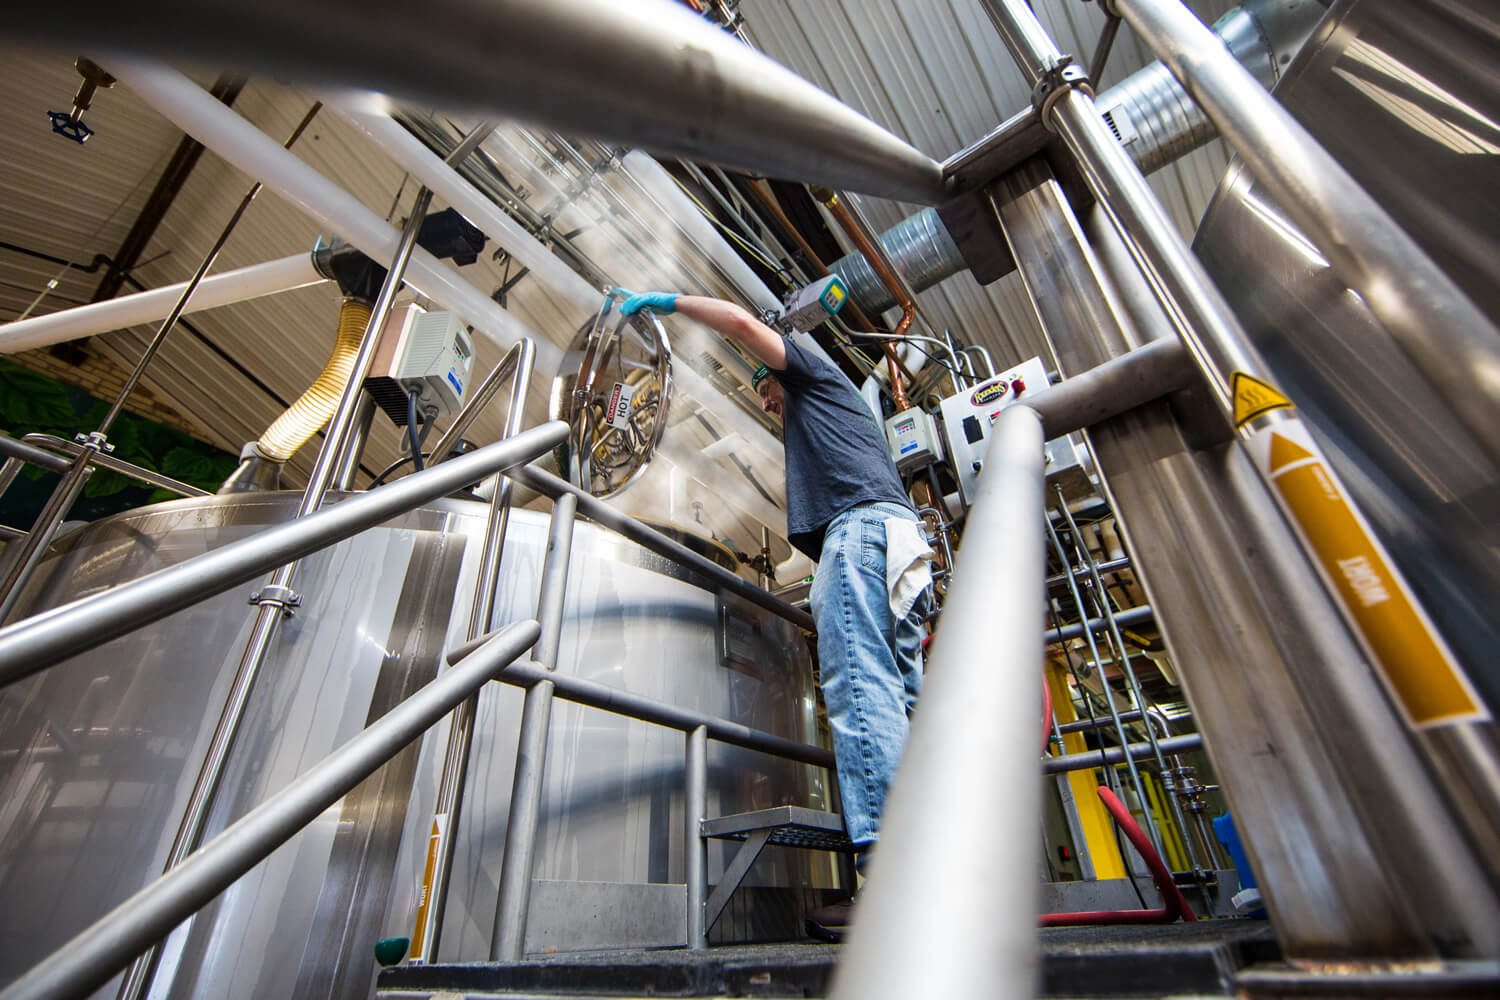 Person working in the brewery